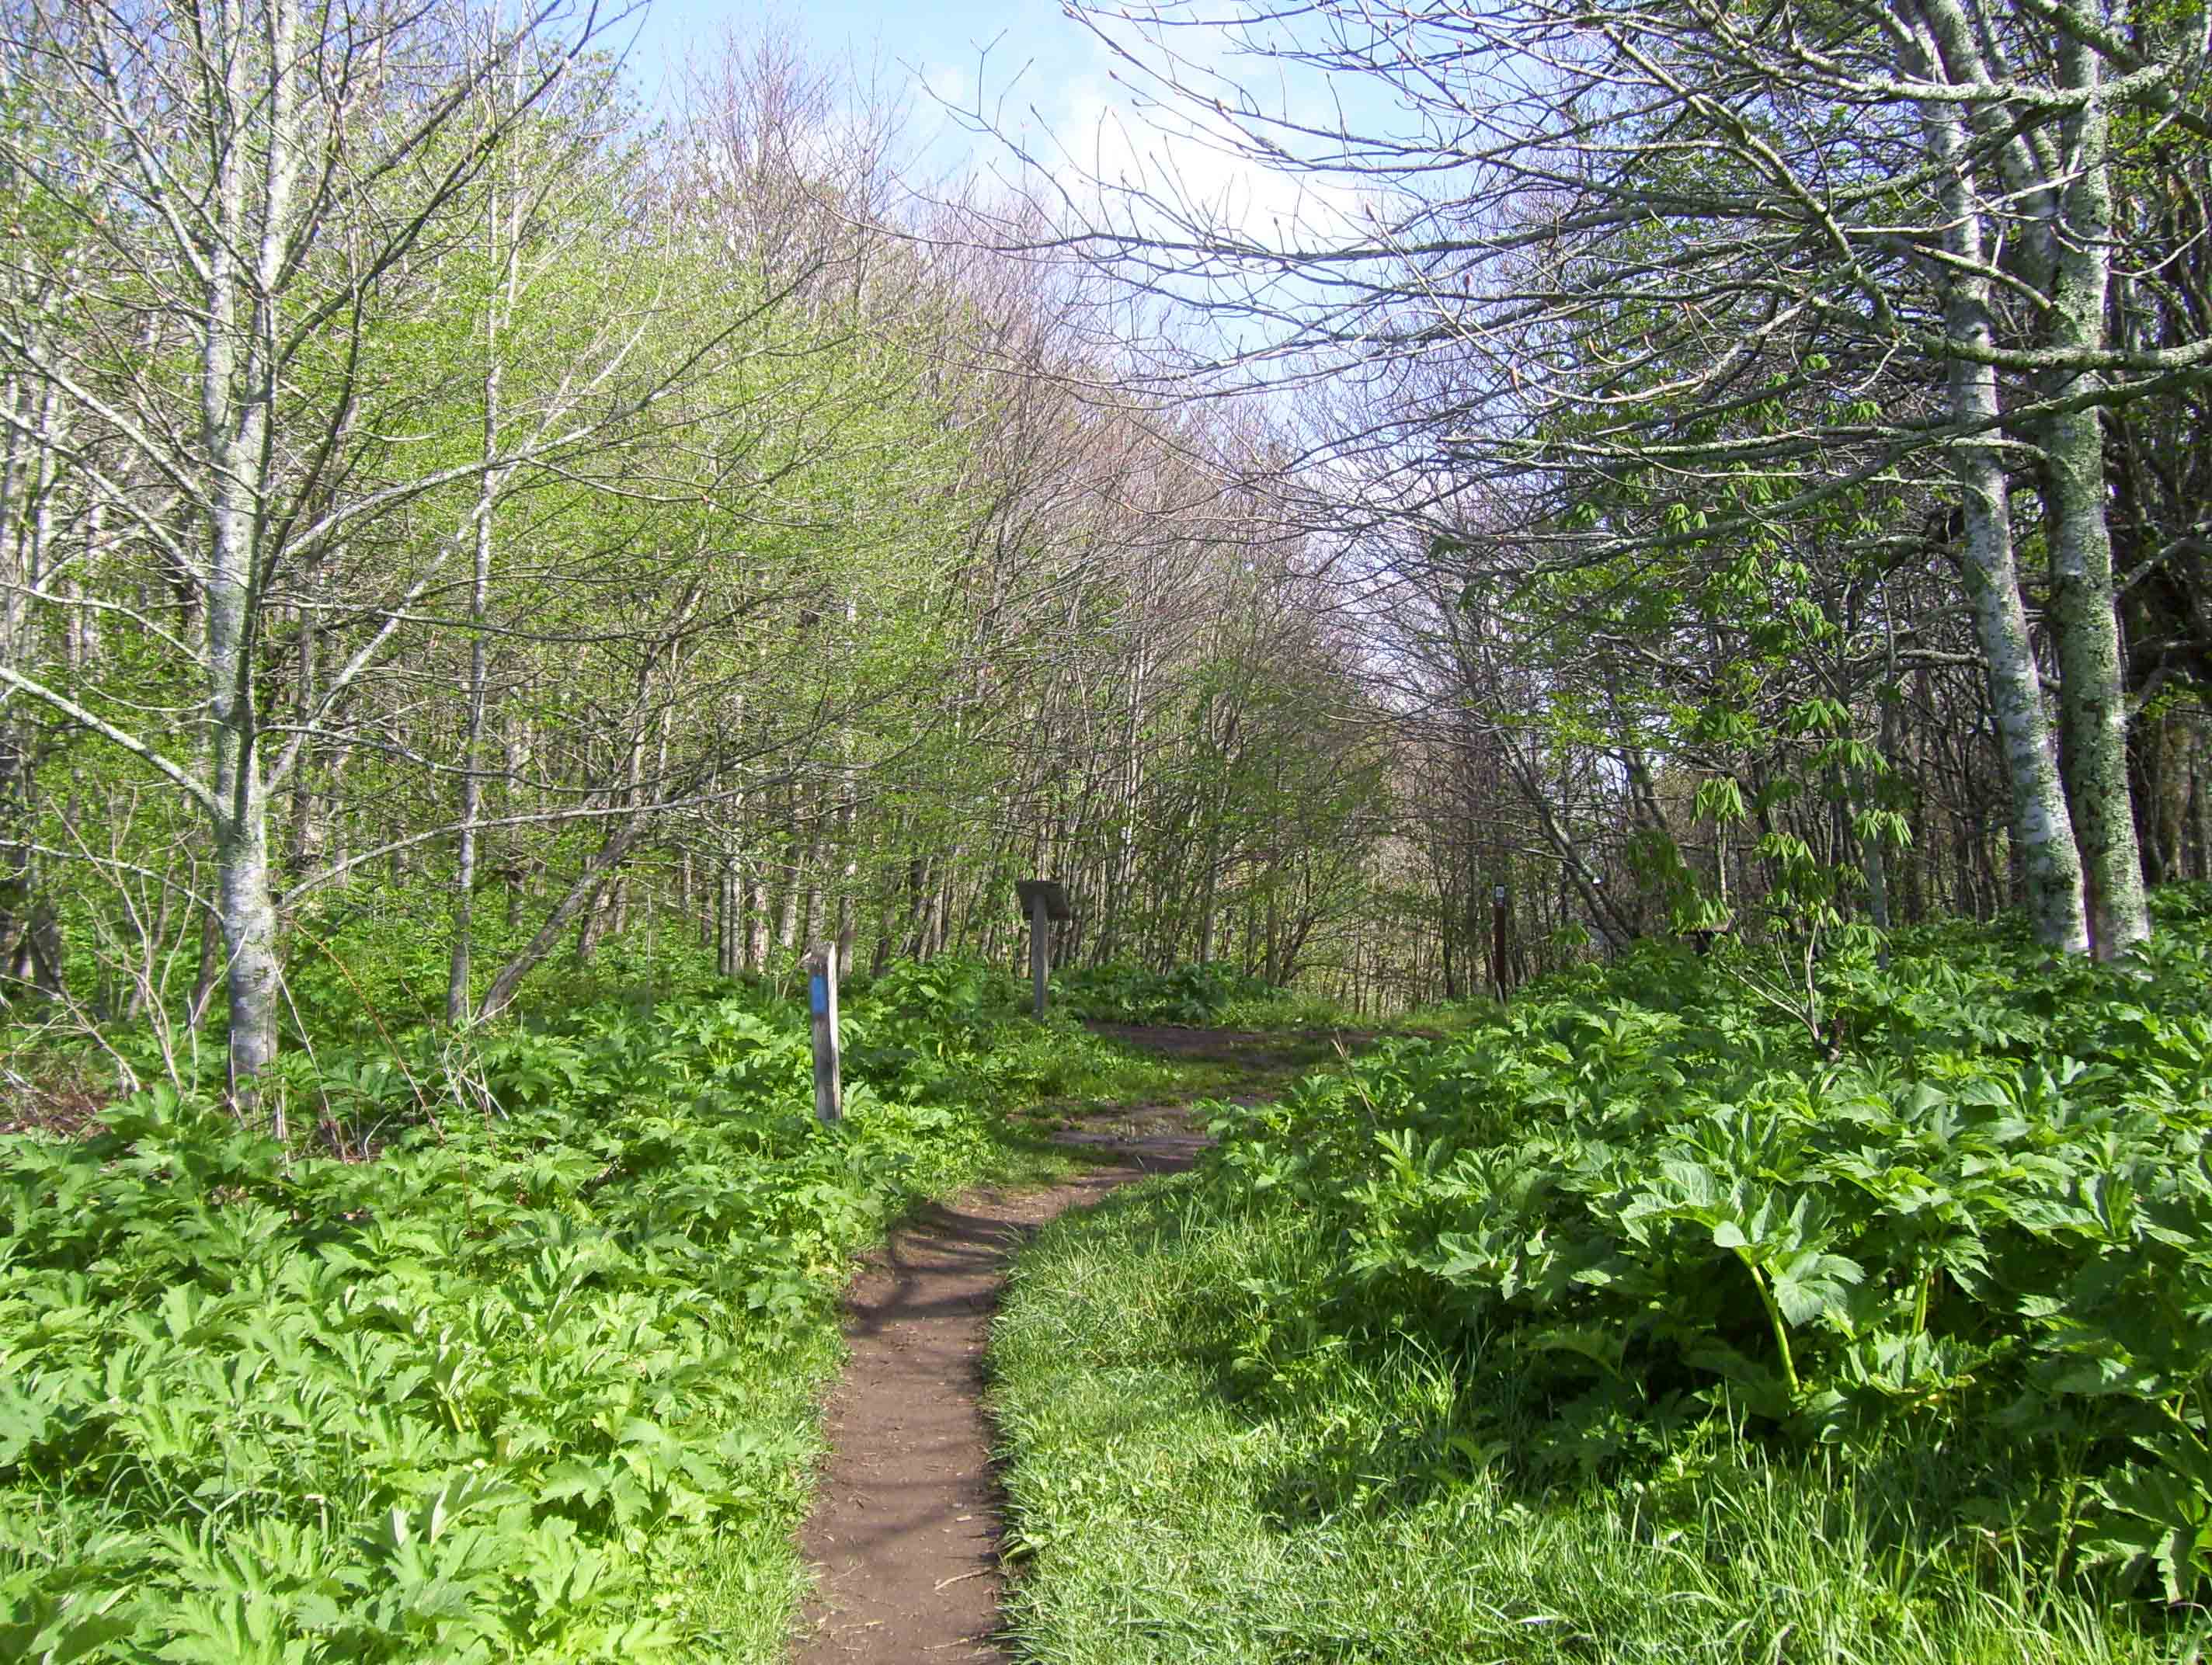 MM 9.2  Trail in Yellow Mountain Gap at intersection with Overmountain Trail.  Courtesy dlcul@conncoll.edu